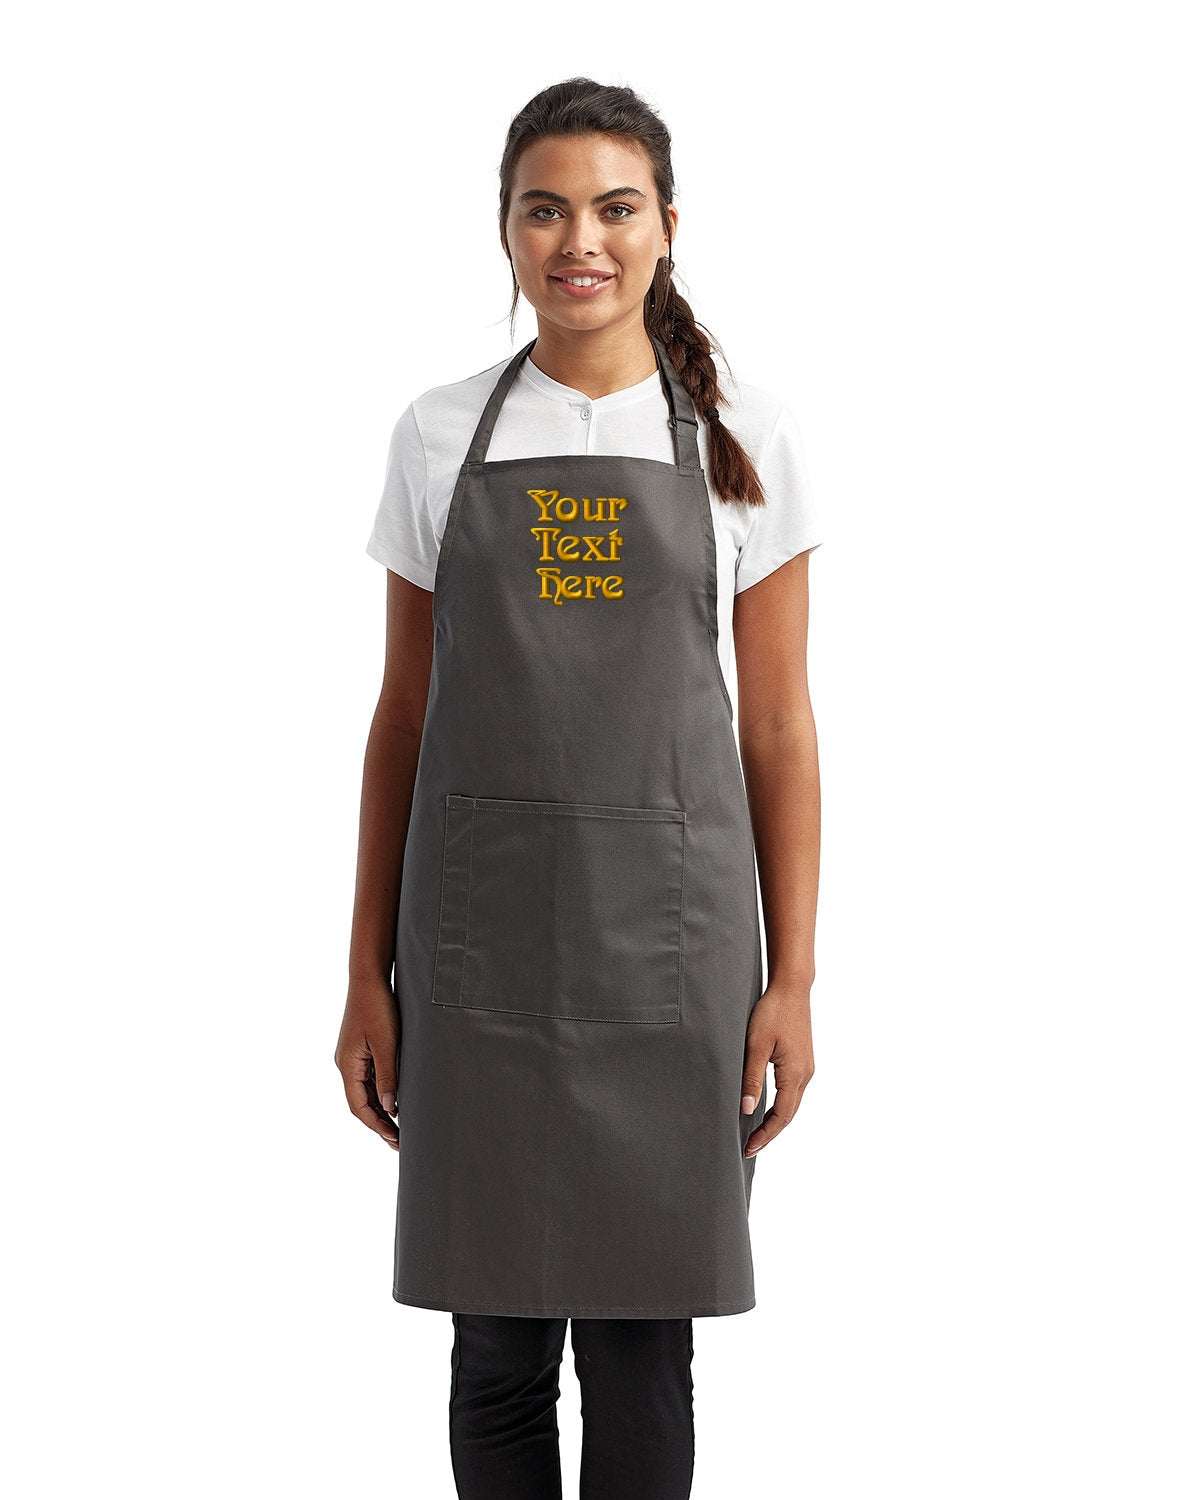 Restaurant Aprons with Your Company Name Embroidered - 3 Pack dark gray